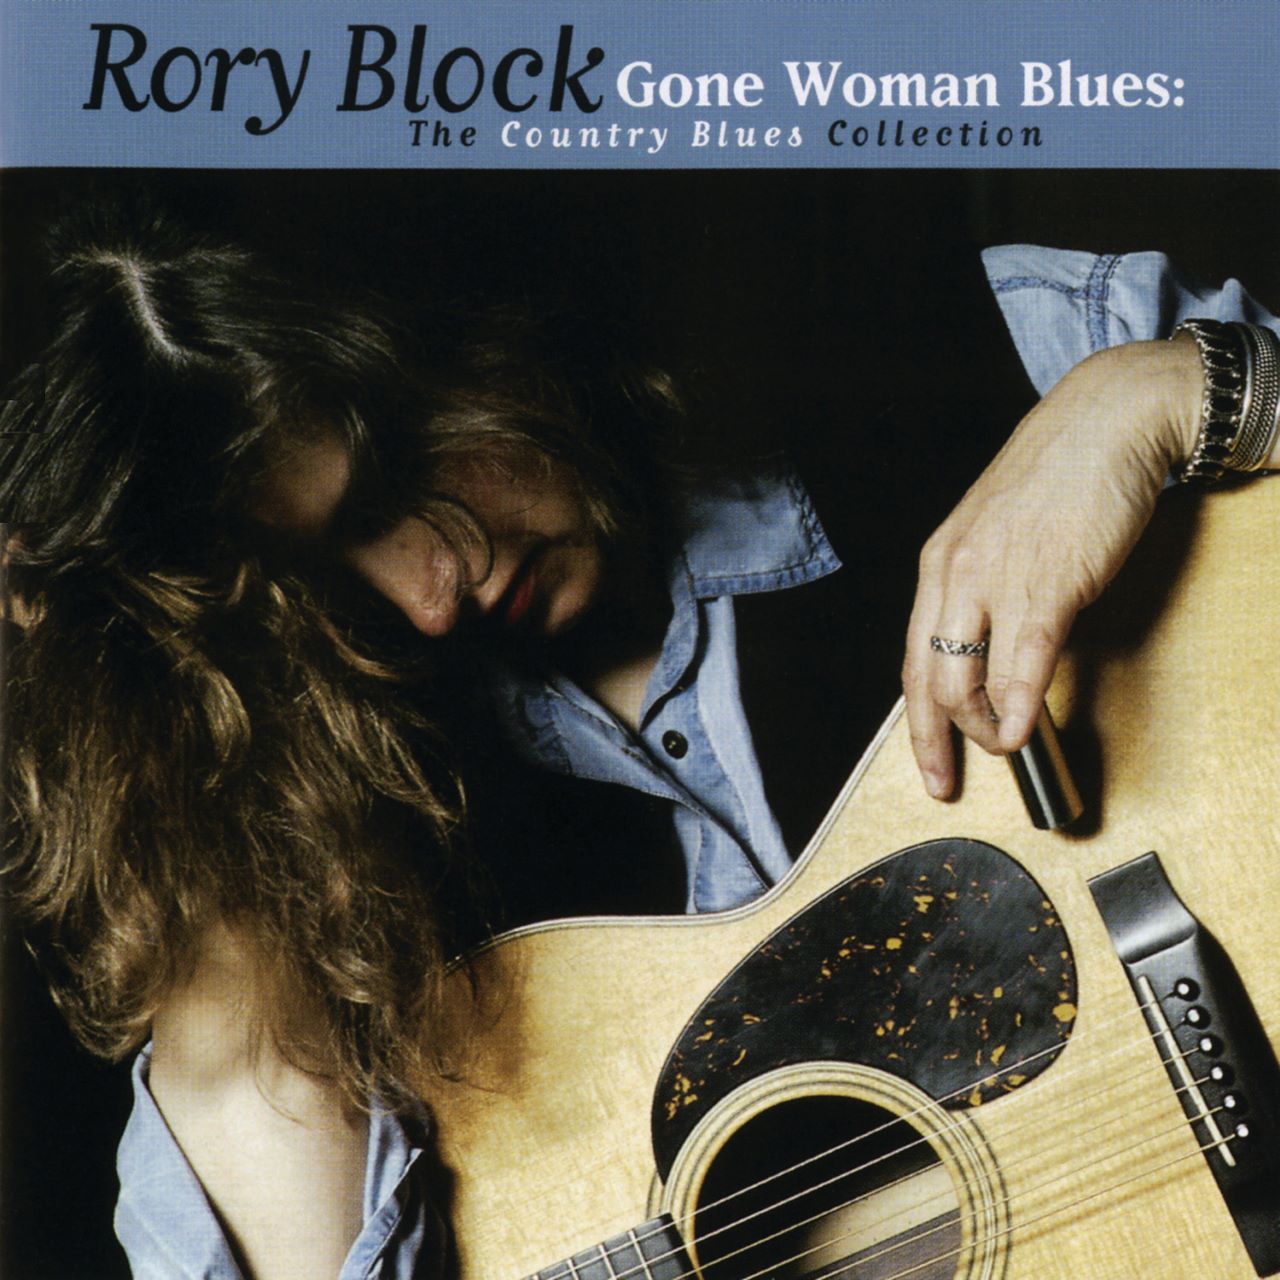 Rory Block - Gone Woman Blues - The Country Blues Collection cover album